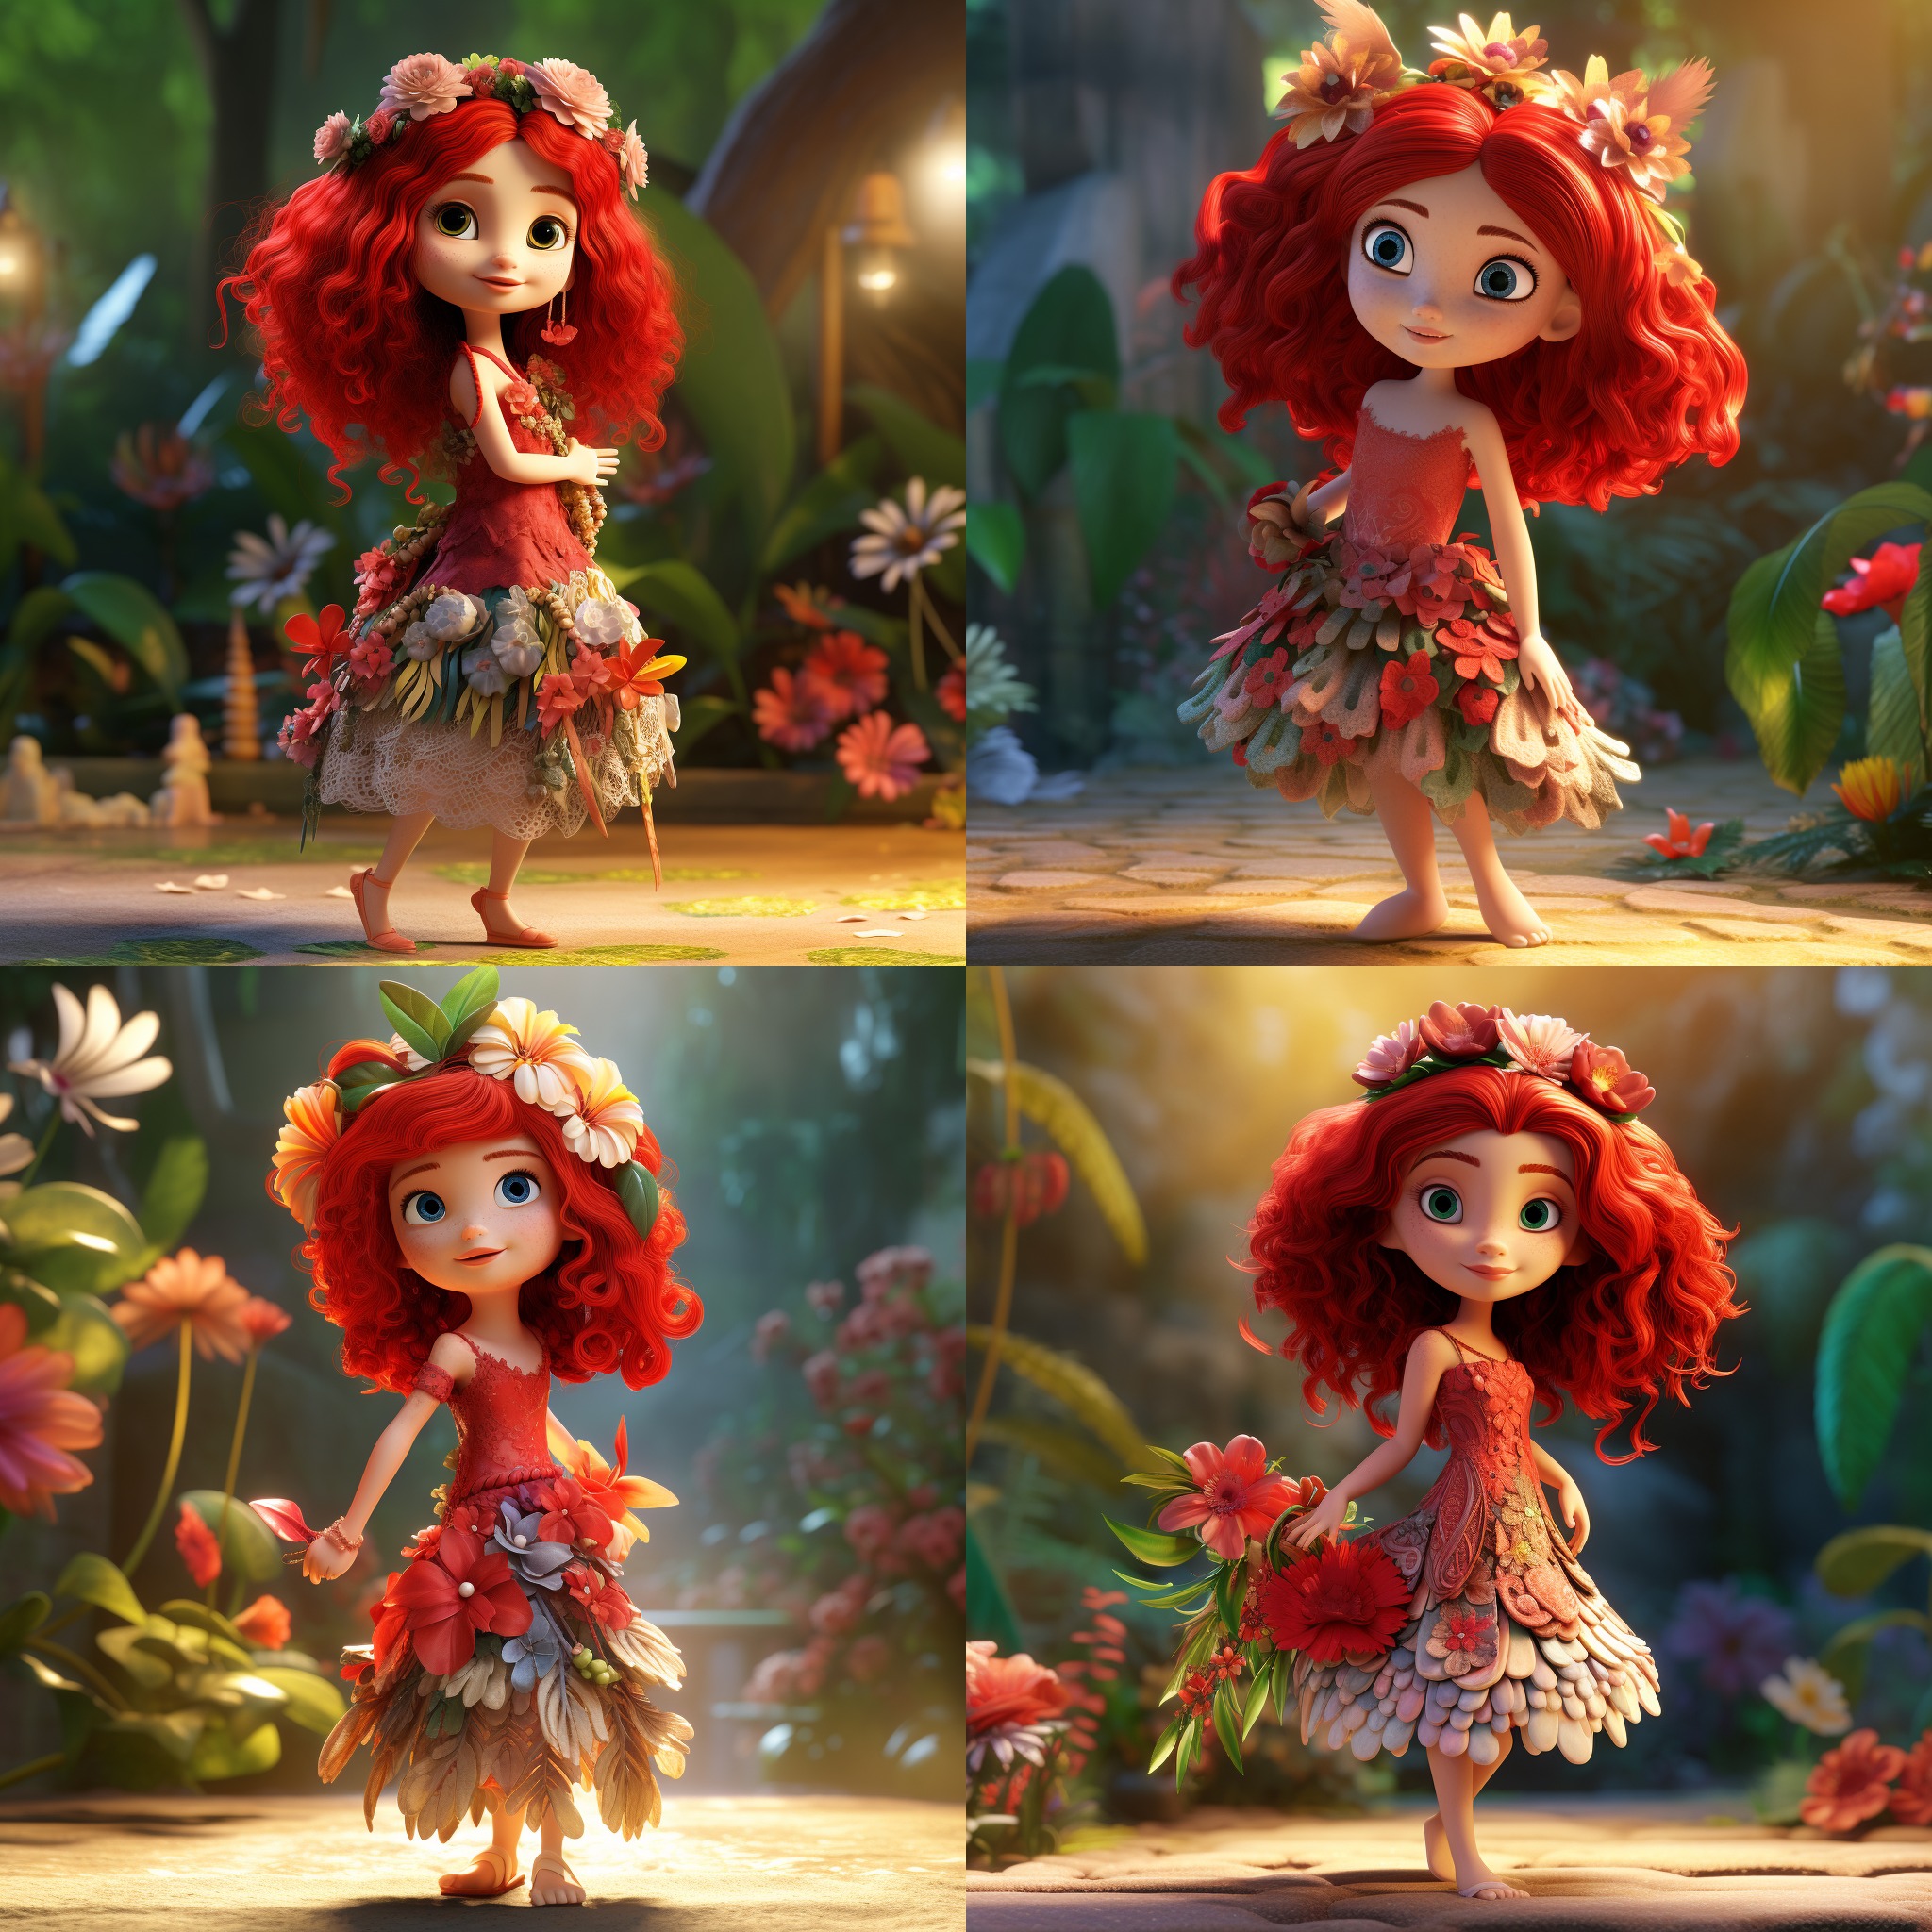 alefelicontactica_wool_doll_puppet_red_hair_tropical_flower_dre_f9cebf9c-fae3-4c67-b86e-10322035e317